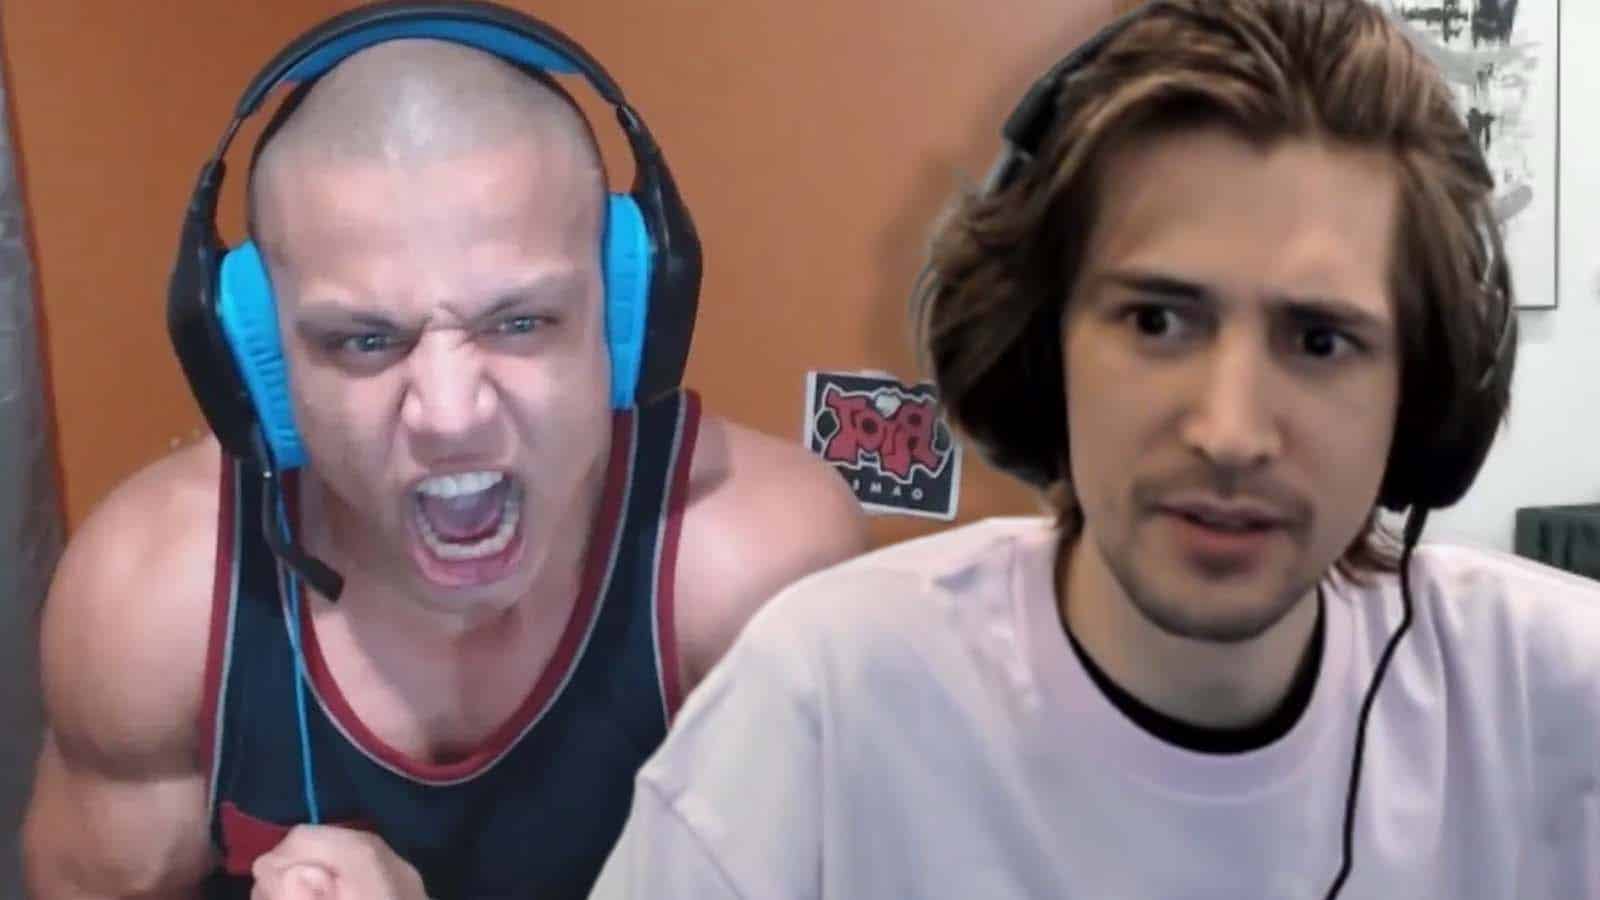 xqc-tyler1-twitch-fans-stop-brigading-hate